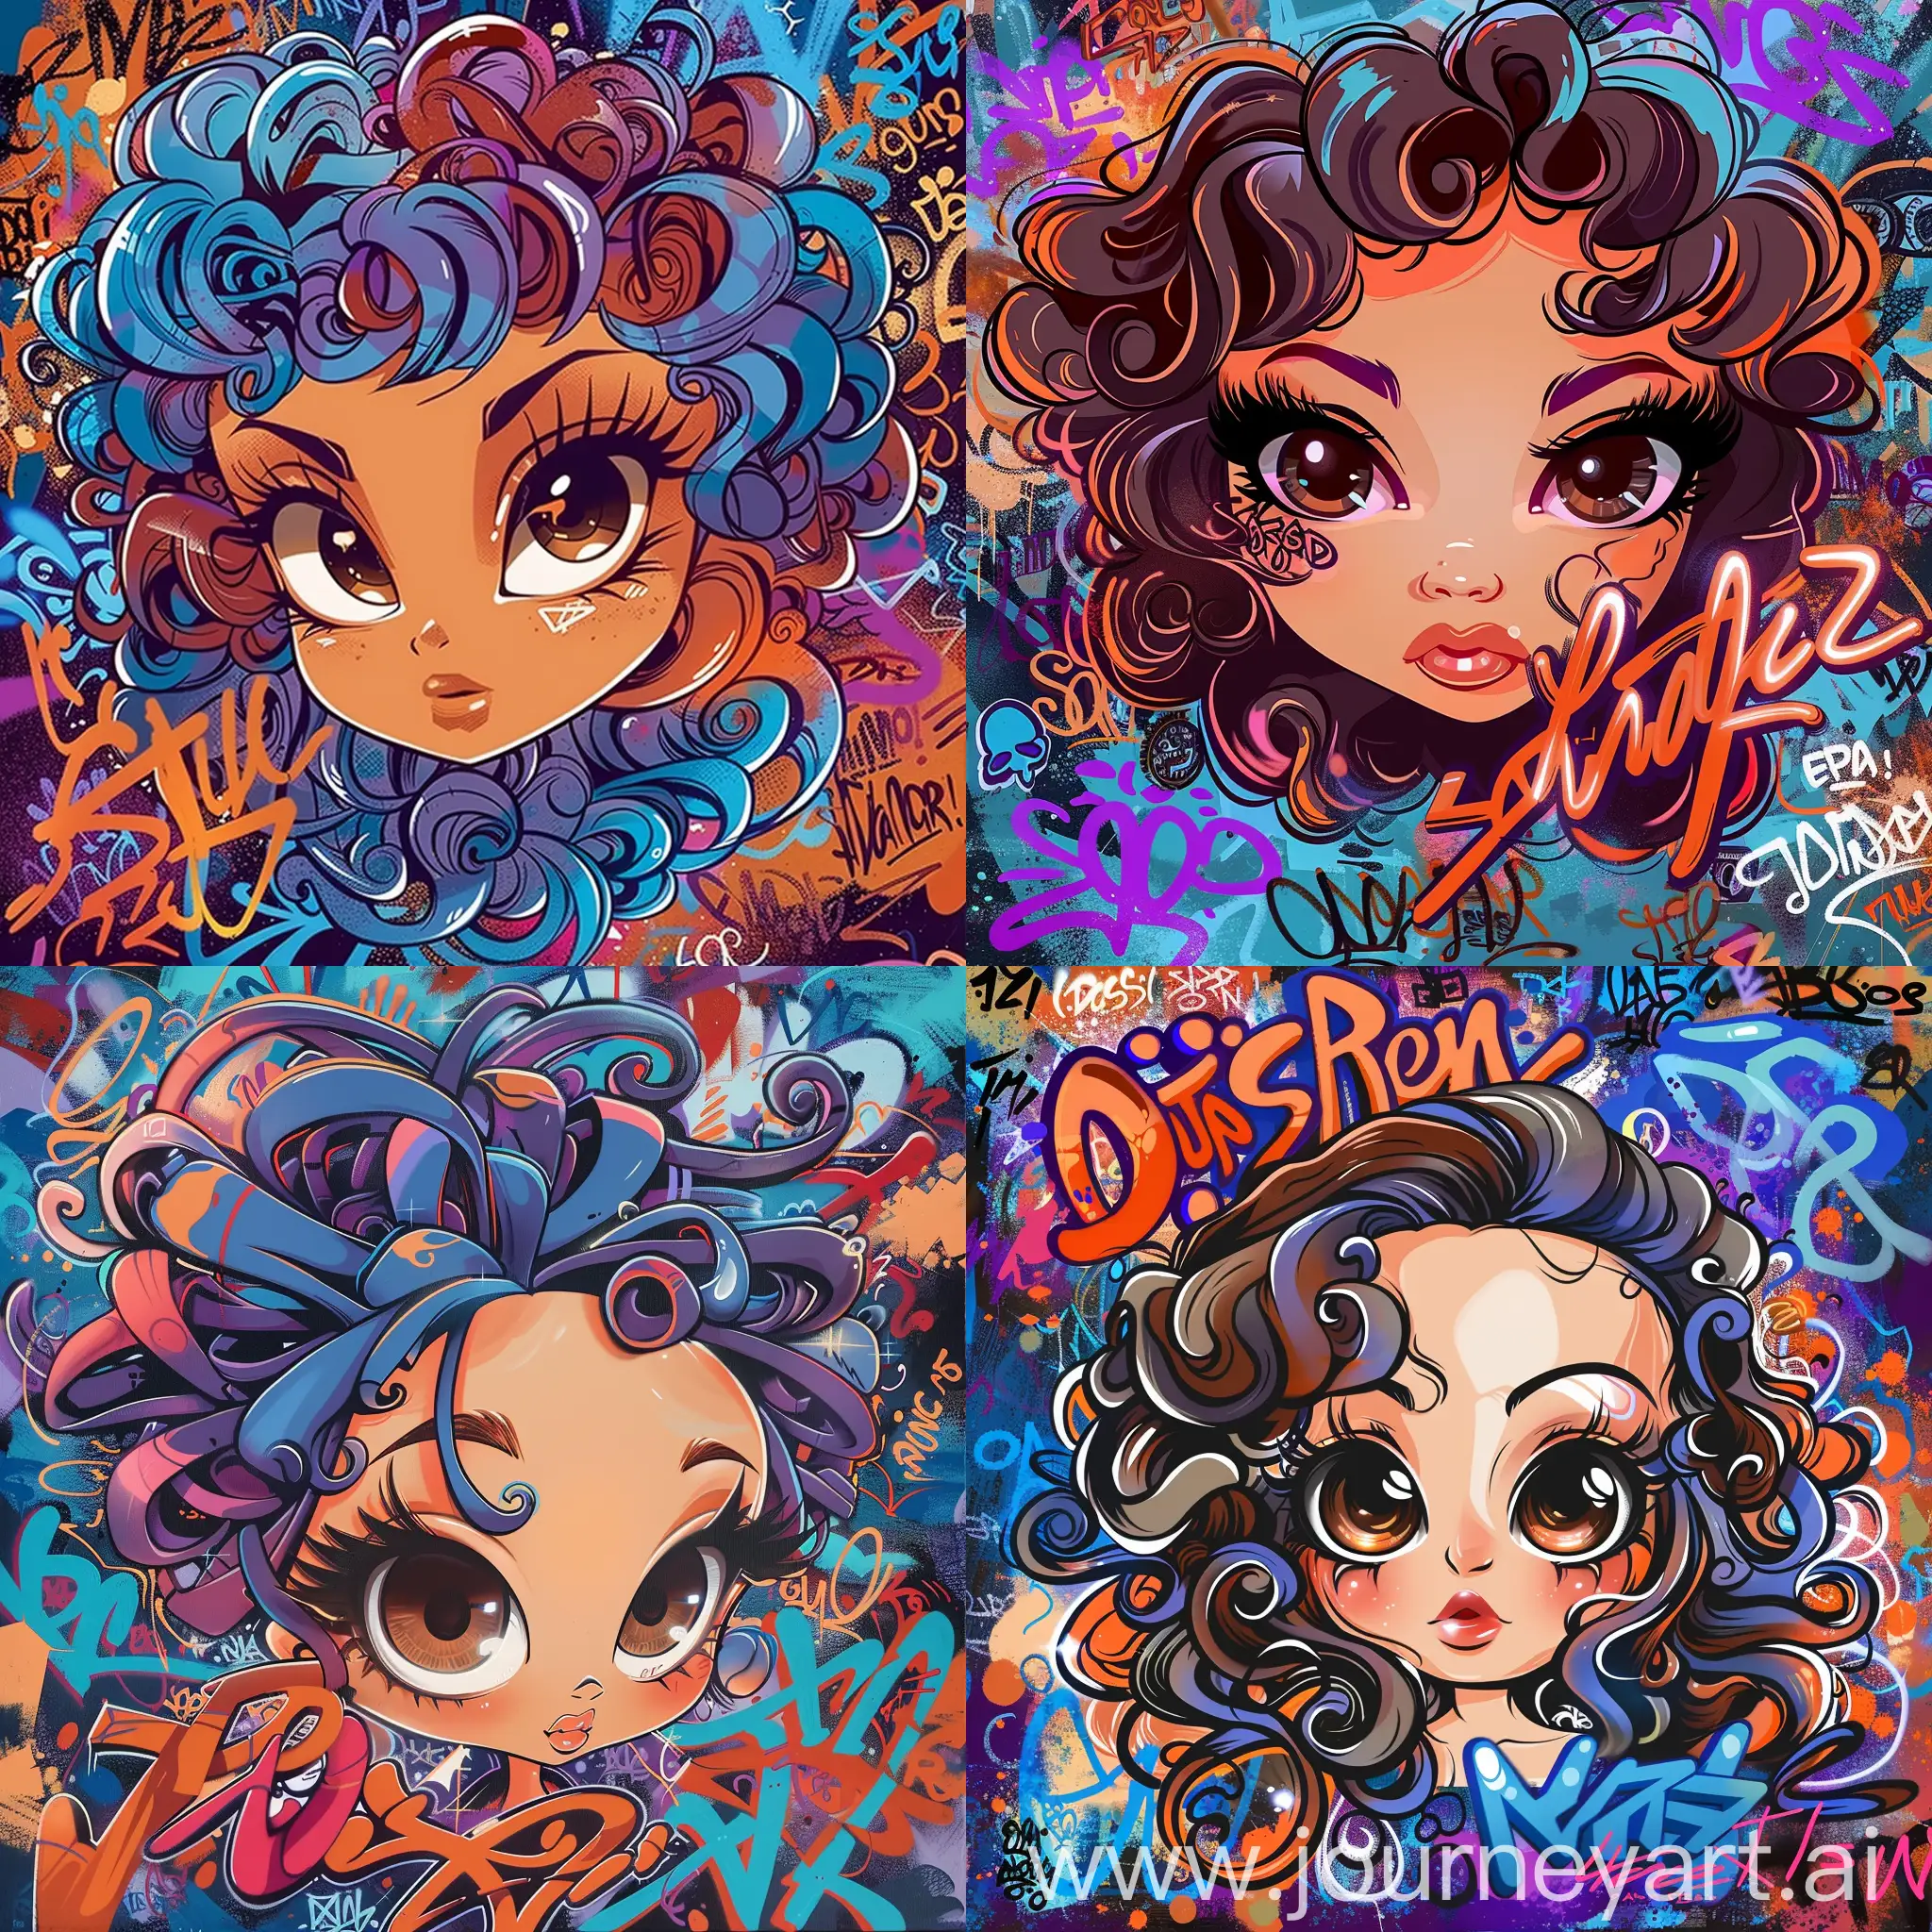 Create a stylized portrait with graffiti-like elements overlaying and surroundinga foxy cute chibi women with large arfo hair curly  large cut eyes that are brown   long eyelashes  cute glossy lips. The background and surrounding space should be filled with vibrant, expressive graffiti in colors such as blue, purple, orange, and red. Include various words and tags written in different styles Emulate the dynamic and energetic feel of street art while combining it with the formality of a portrait to contrast with the colorful content. --c 5